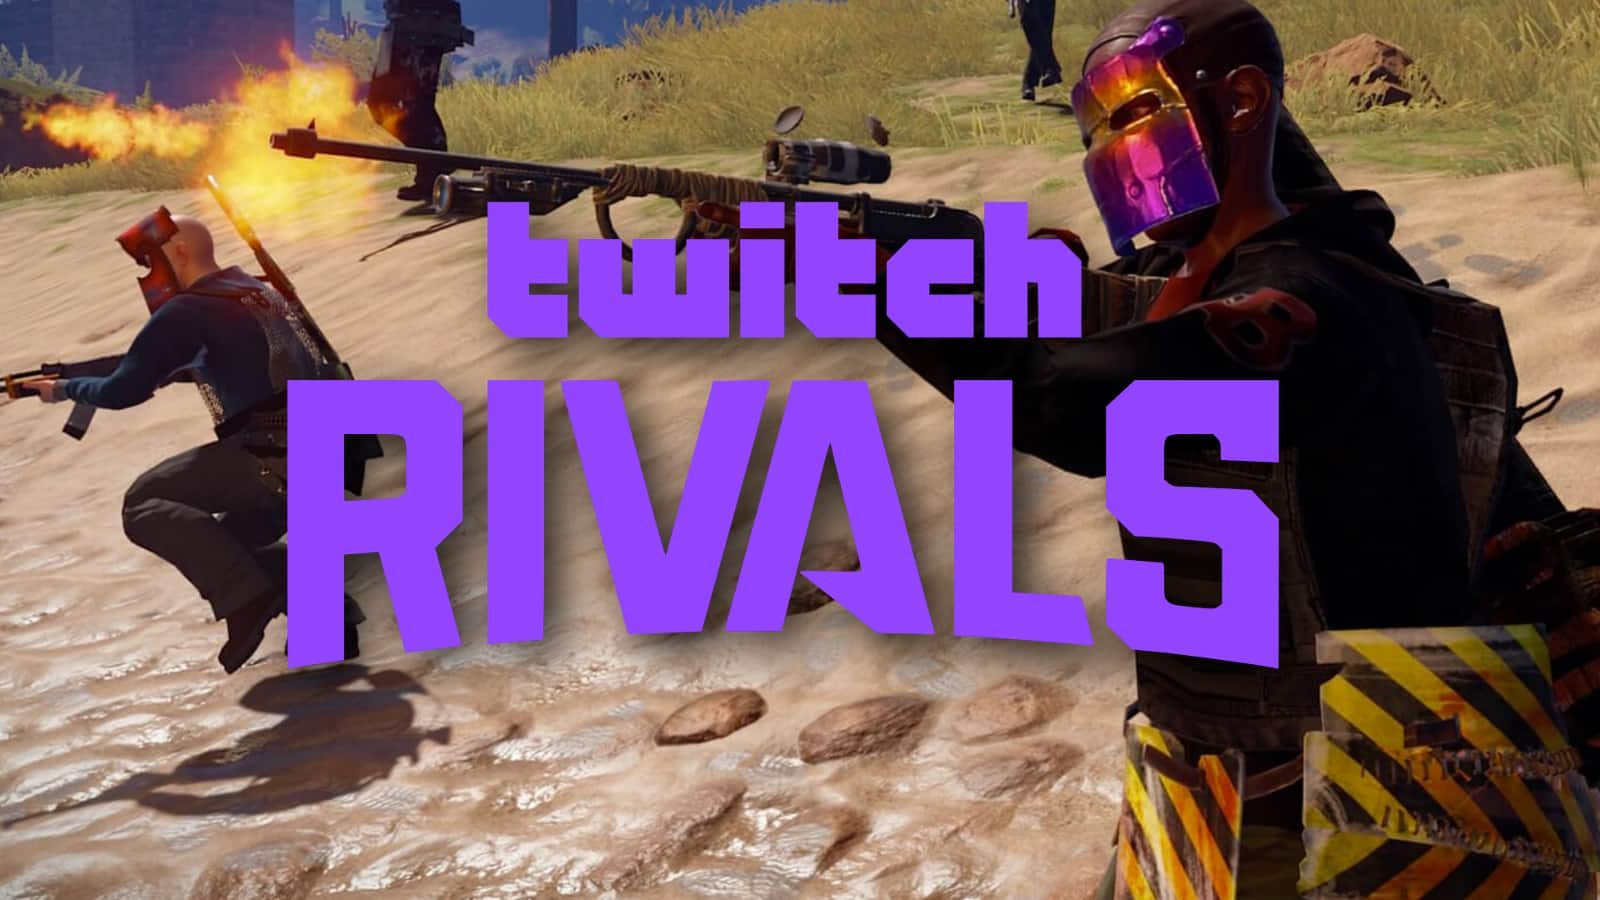 rust-twitch-rivals-4320453